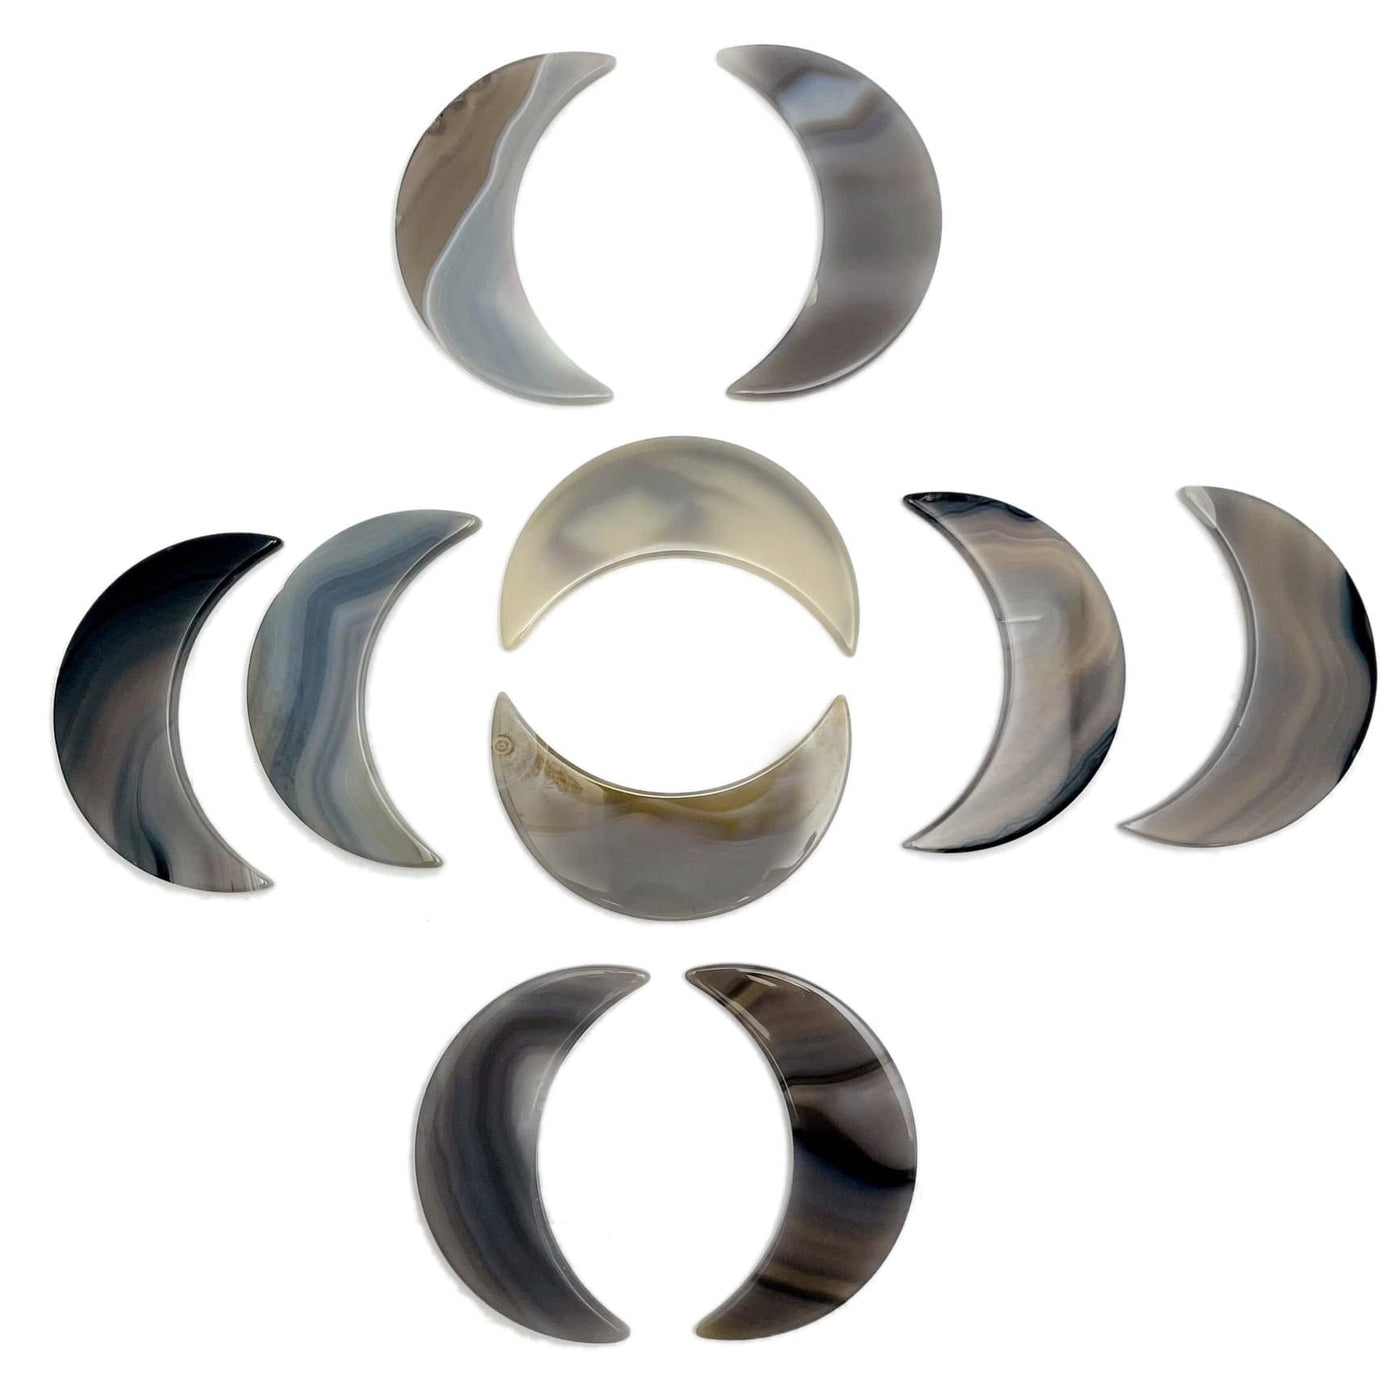 Ten natural agate moons displayed on a white surface.